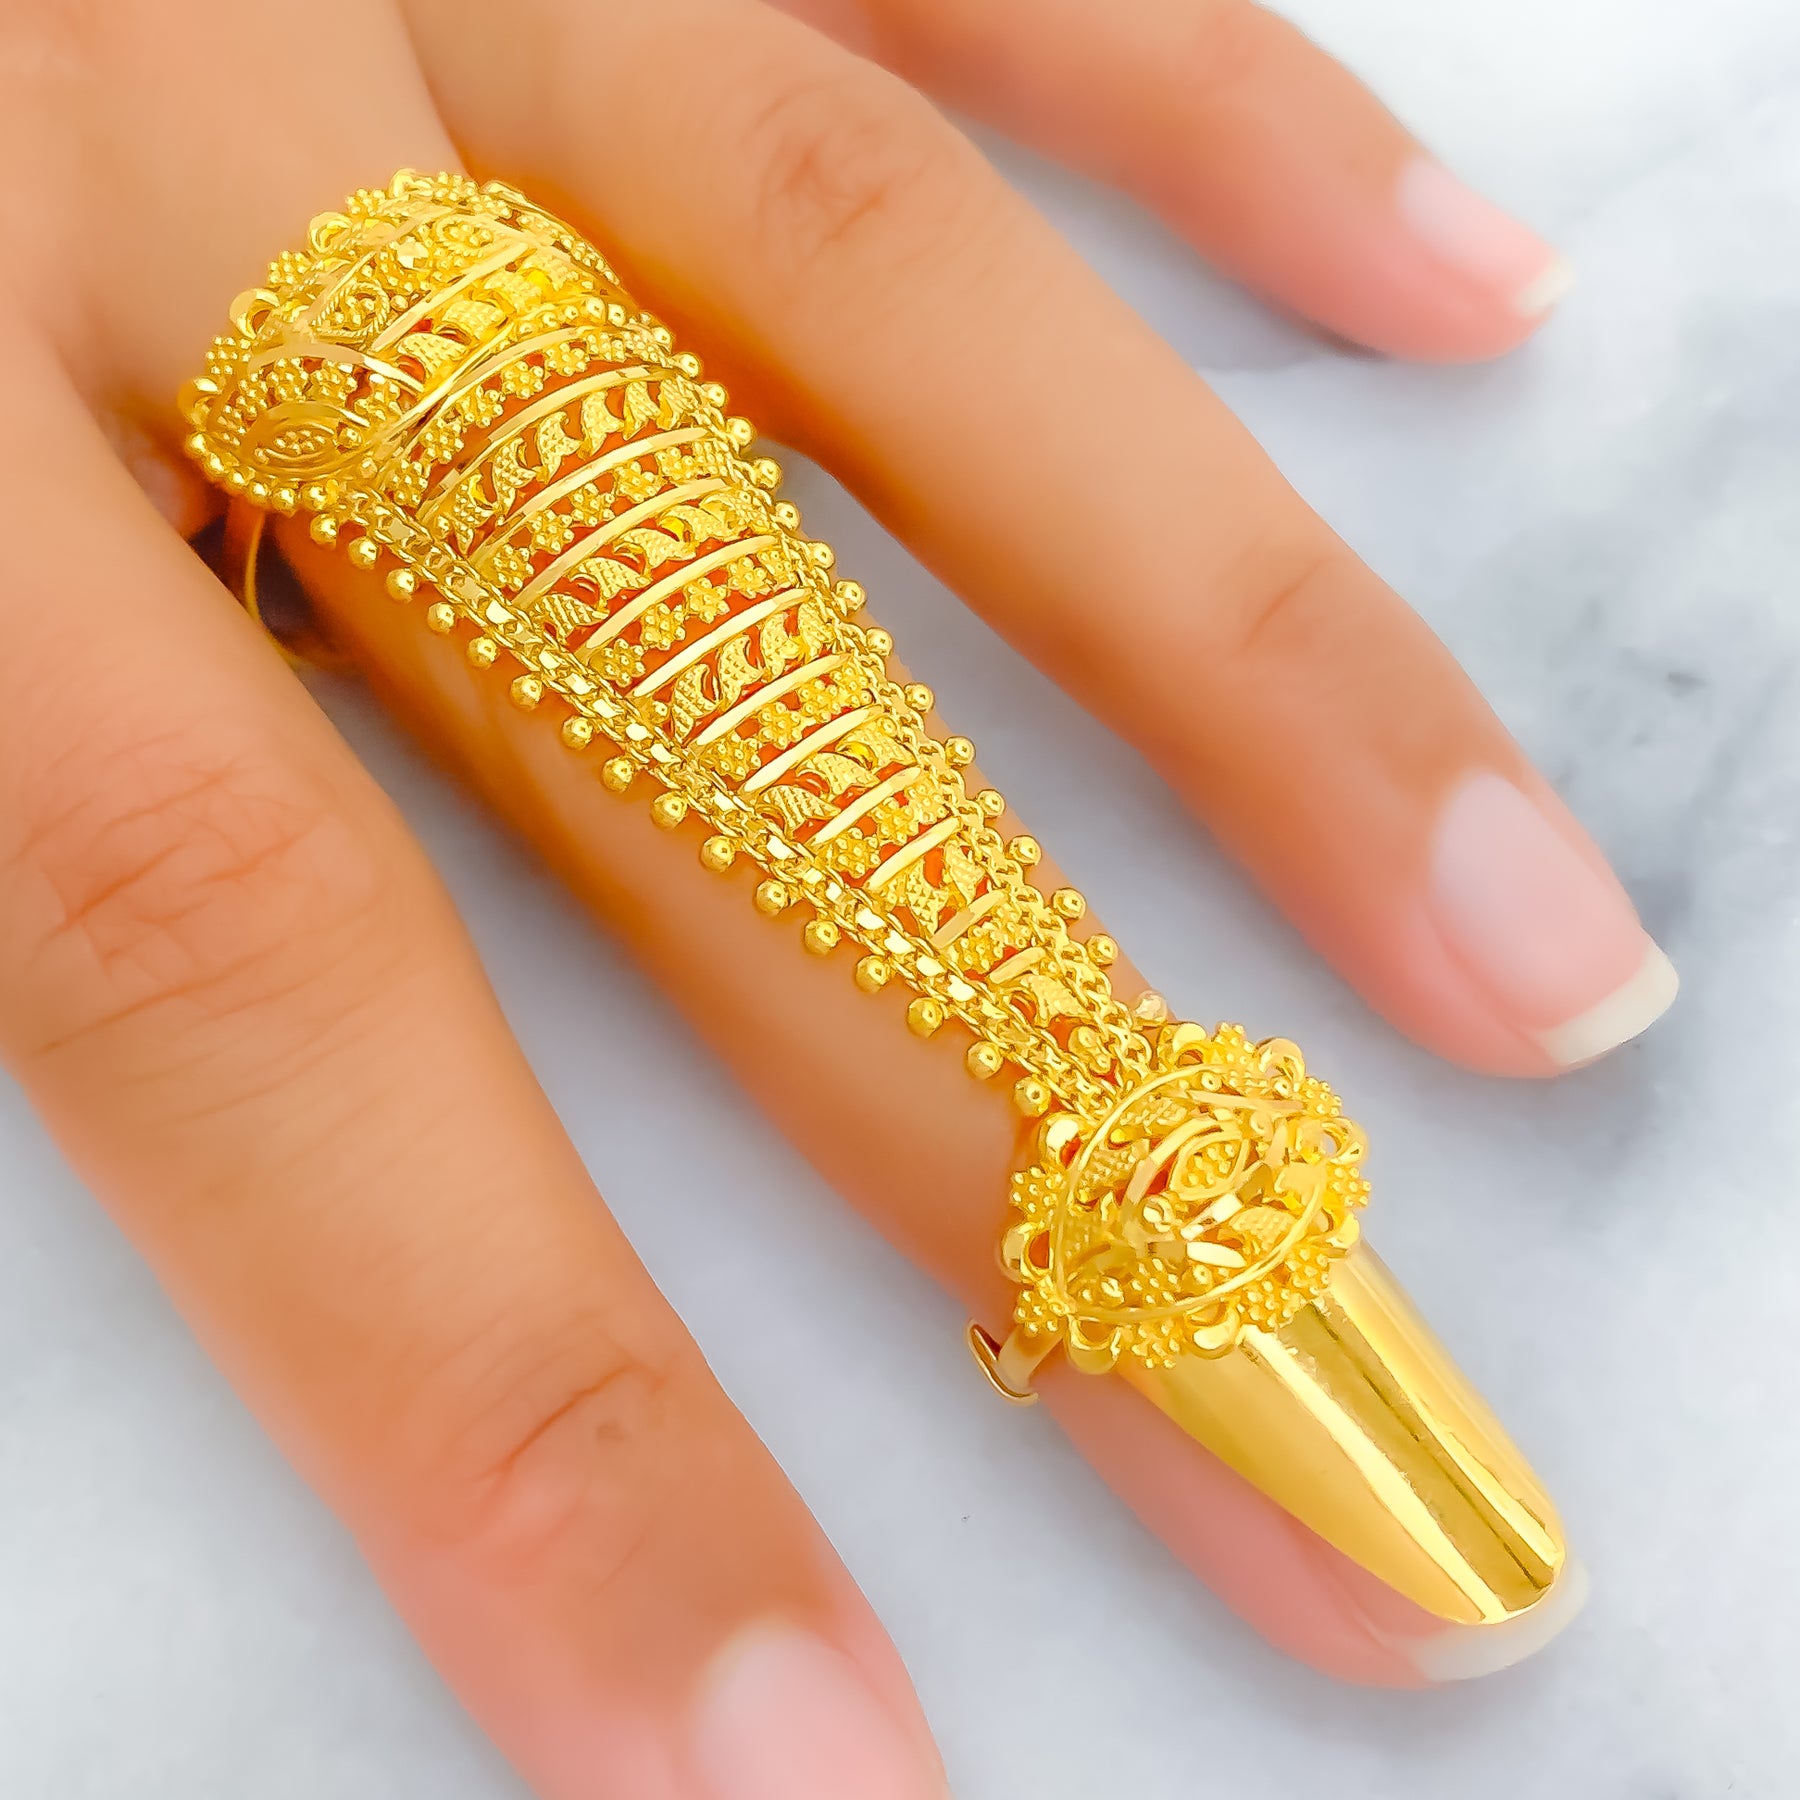 BL Gold Finger Little Diva Fake Nails For Kids (PC) - YoungsGA.com : Beauty  Supply, Fashion, and Jewelry Wholesale Distributor